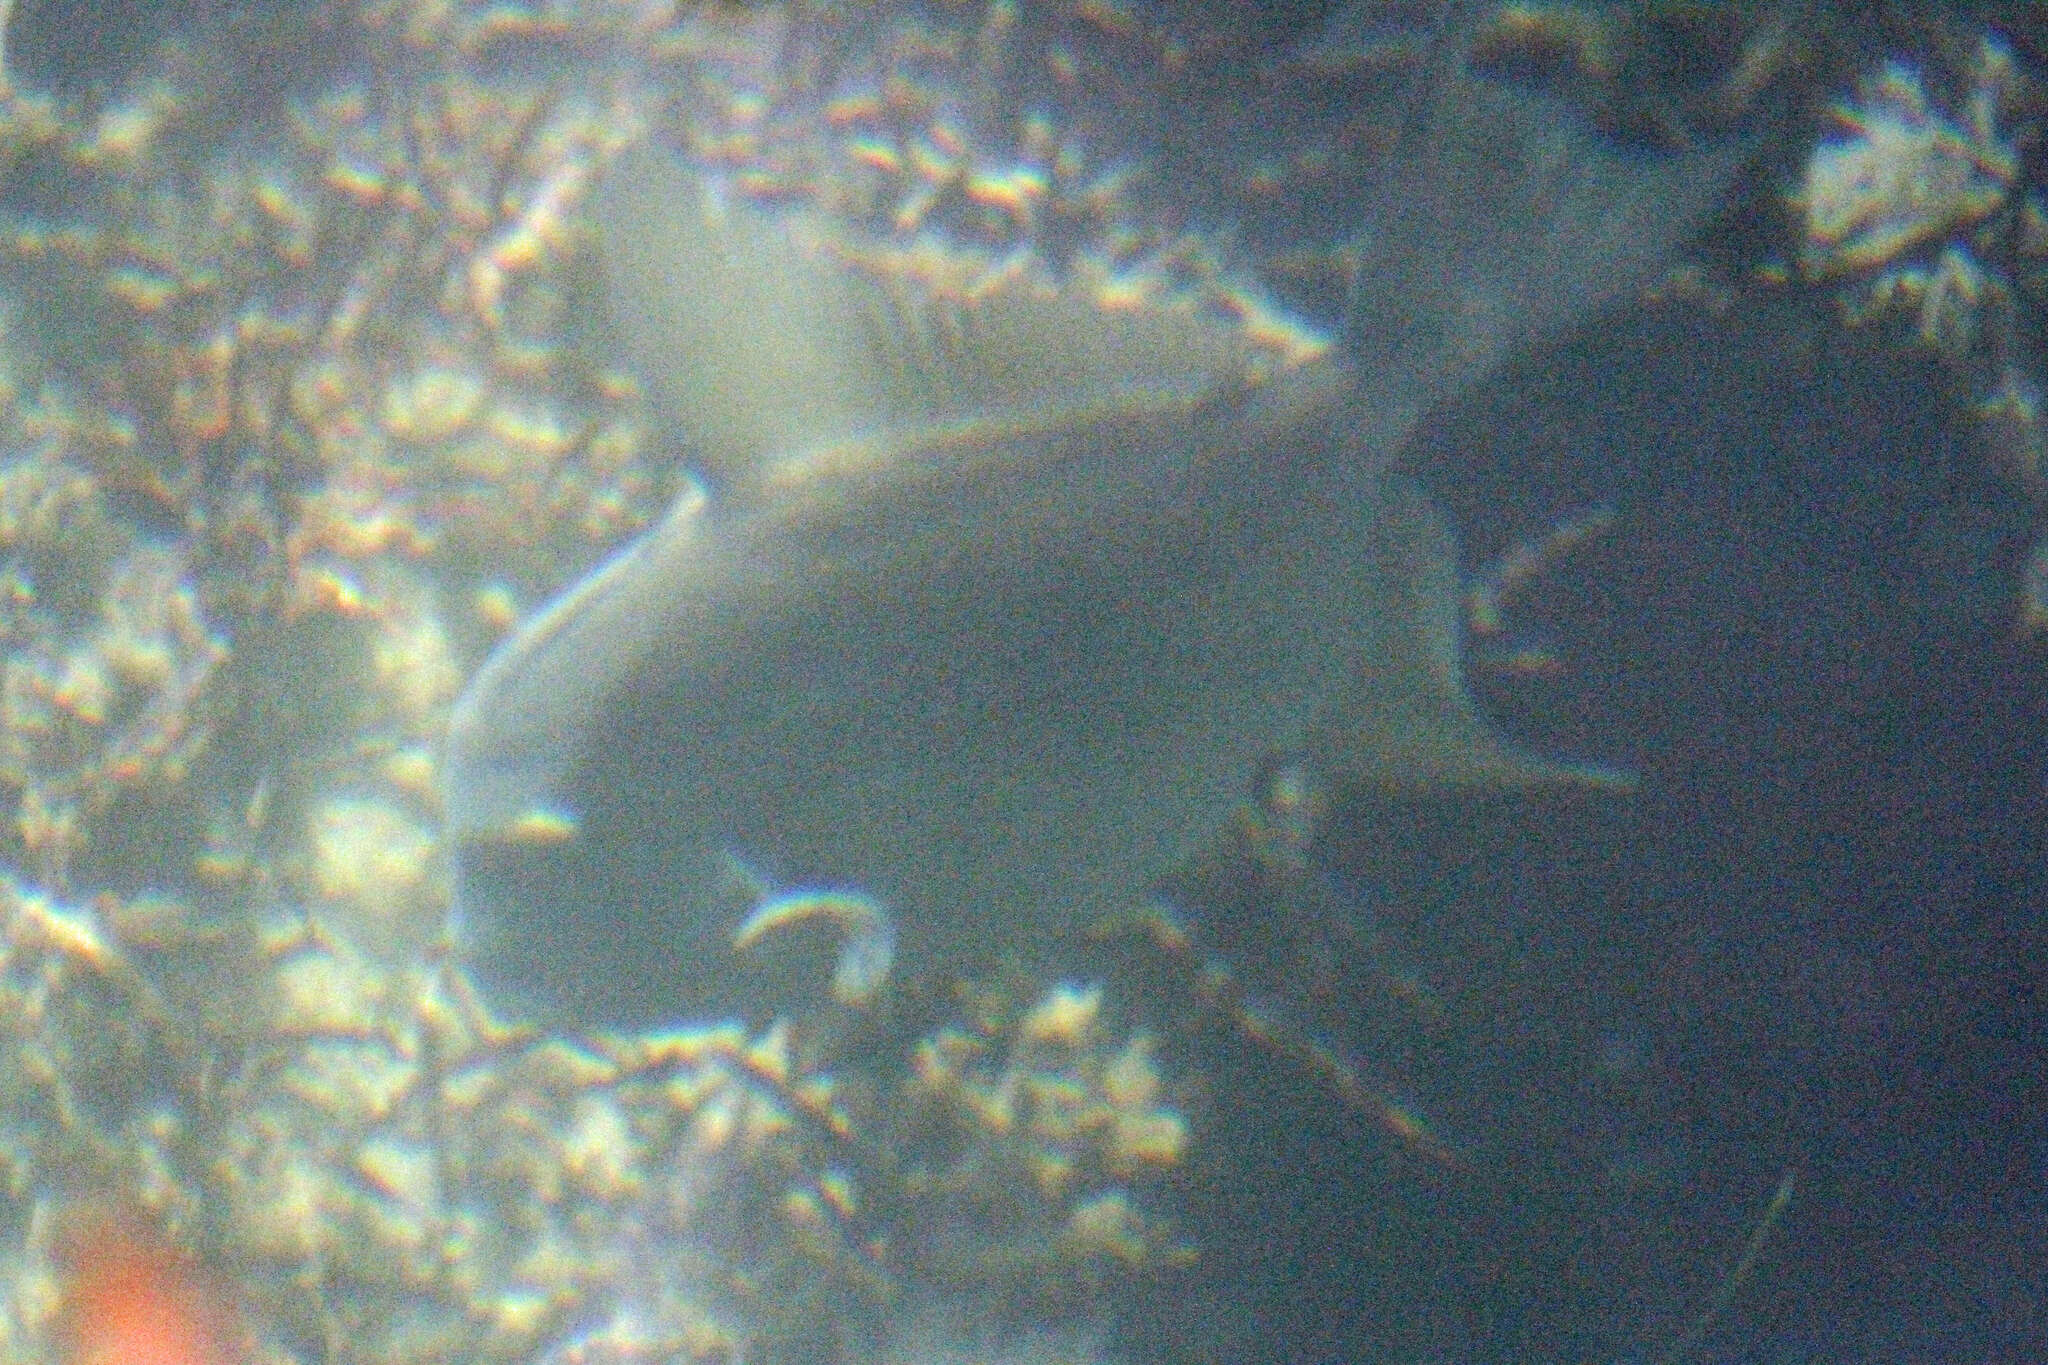 Image of Finescale Triggerfish